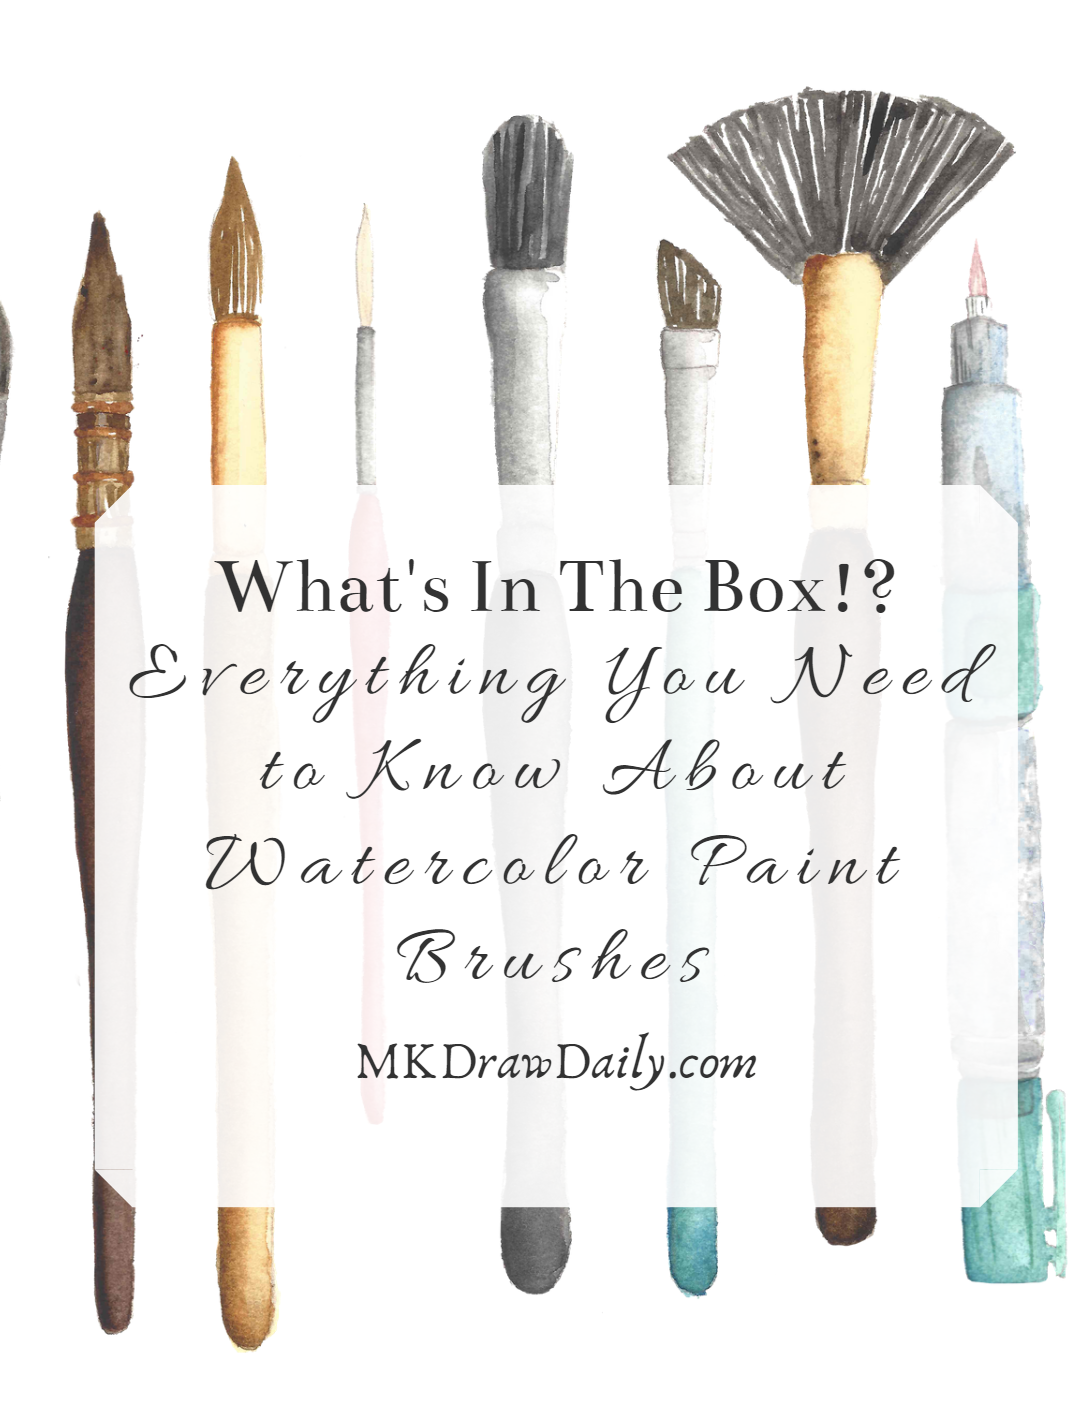 What's in the Box!? What You Need to Know About Watercolor Paint